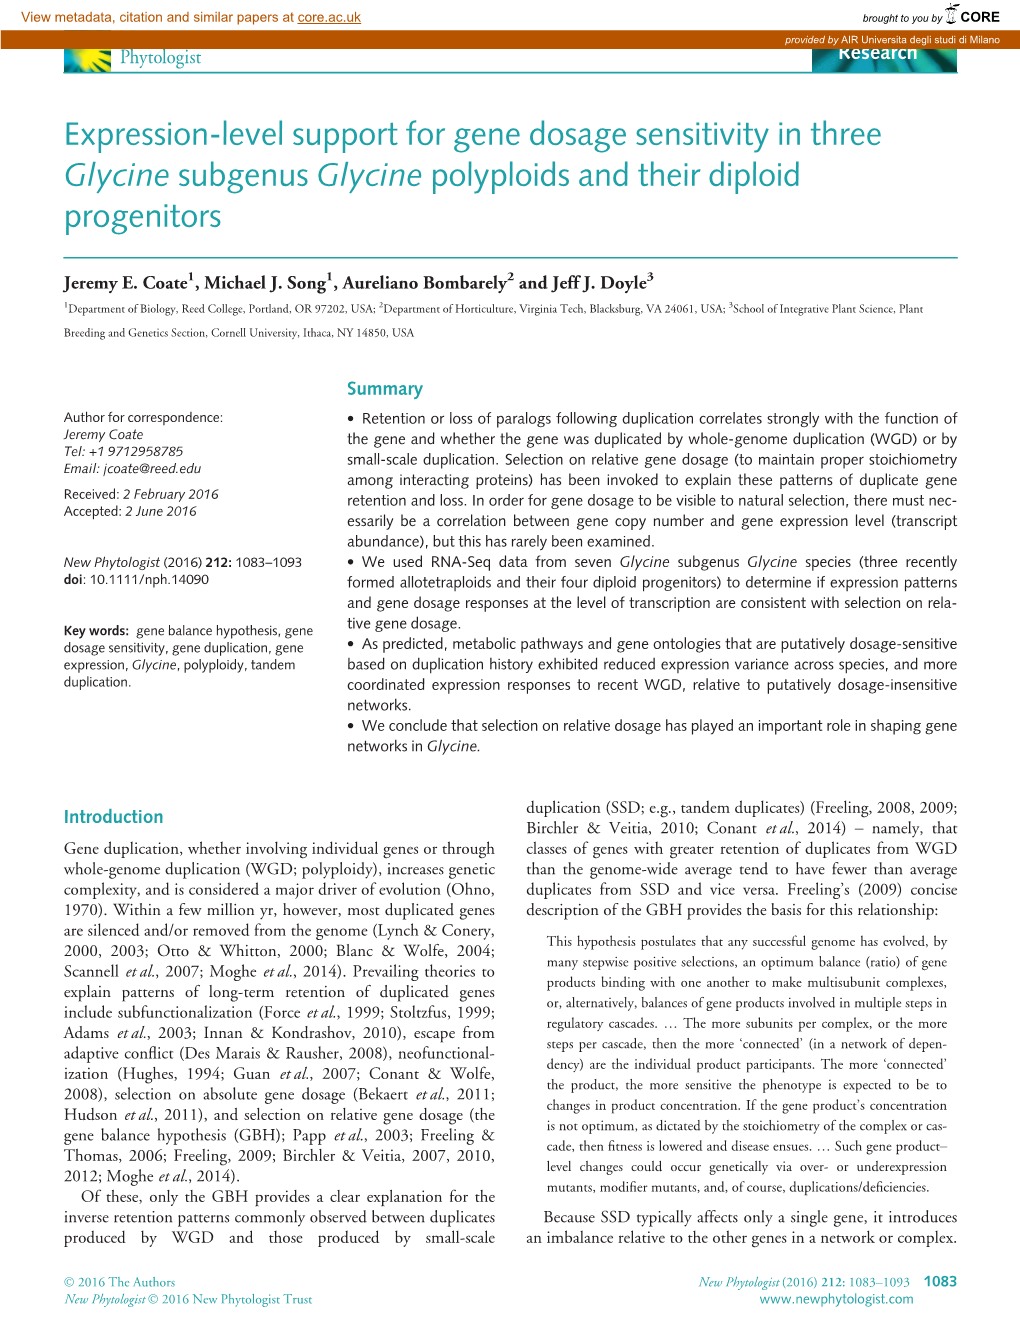 Level Support for Gene Dosage Sensitivity in Three Glycine Subgenus Glycine Polyploids and Their Diploid Progenitors